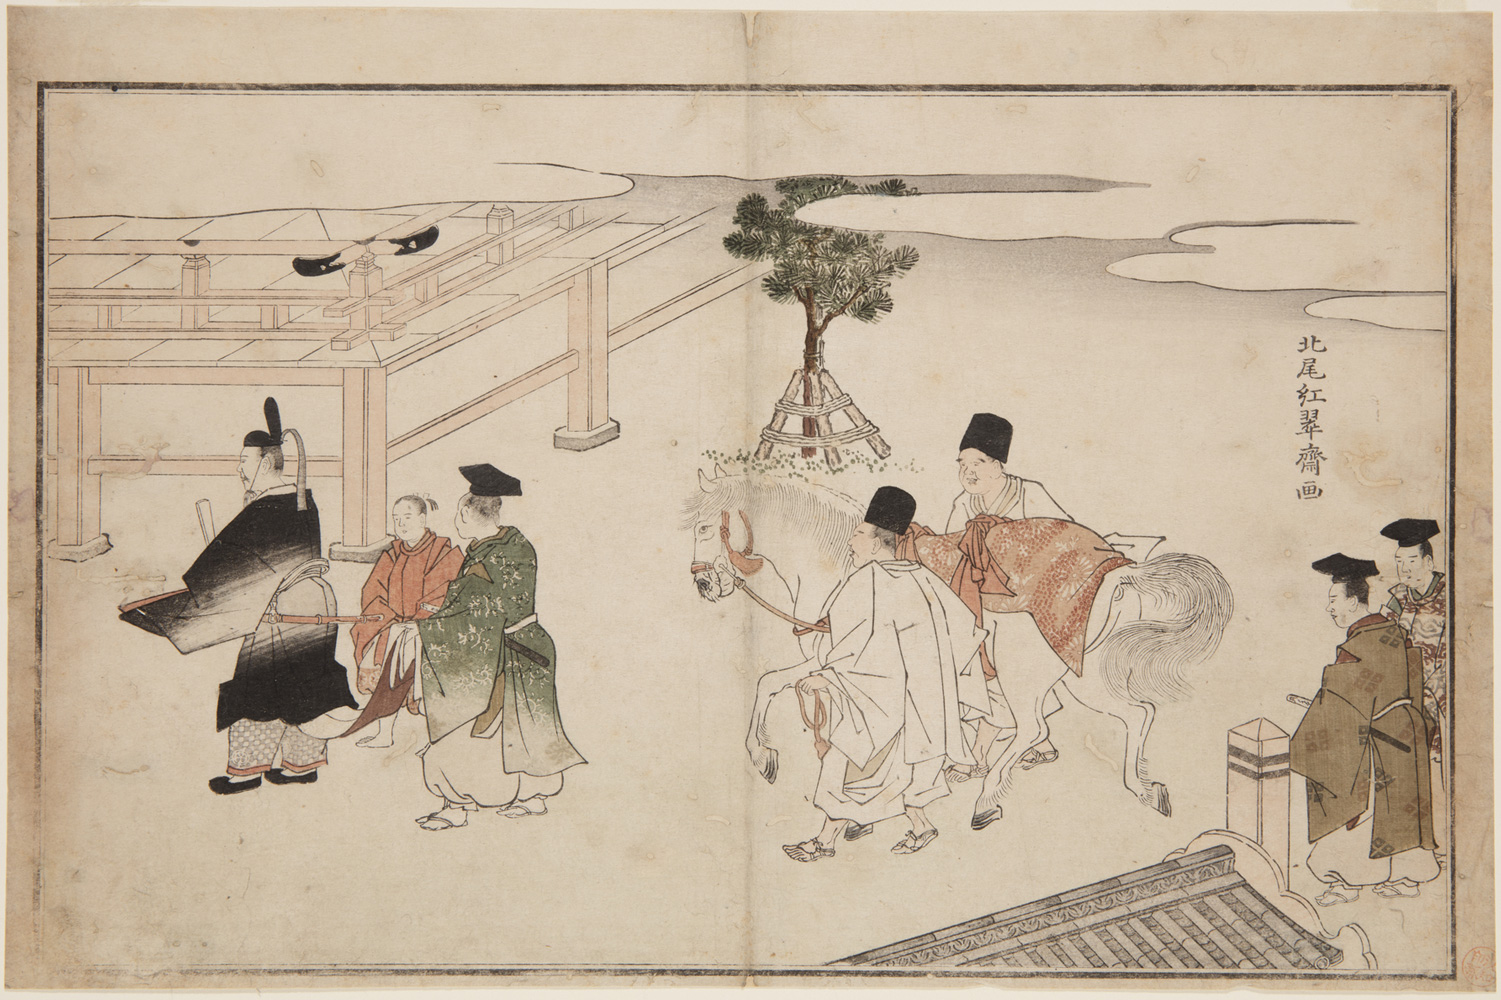 Japanese print of a group of people dressed in traditional clothes, in the front is a samurai lord followed by two attendants, behind them a white horse is being led by two men, two other men watch on.